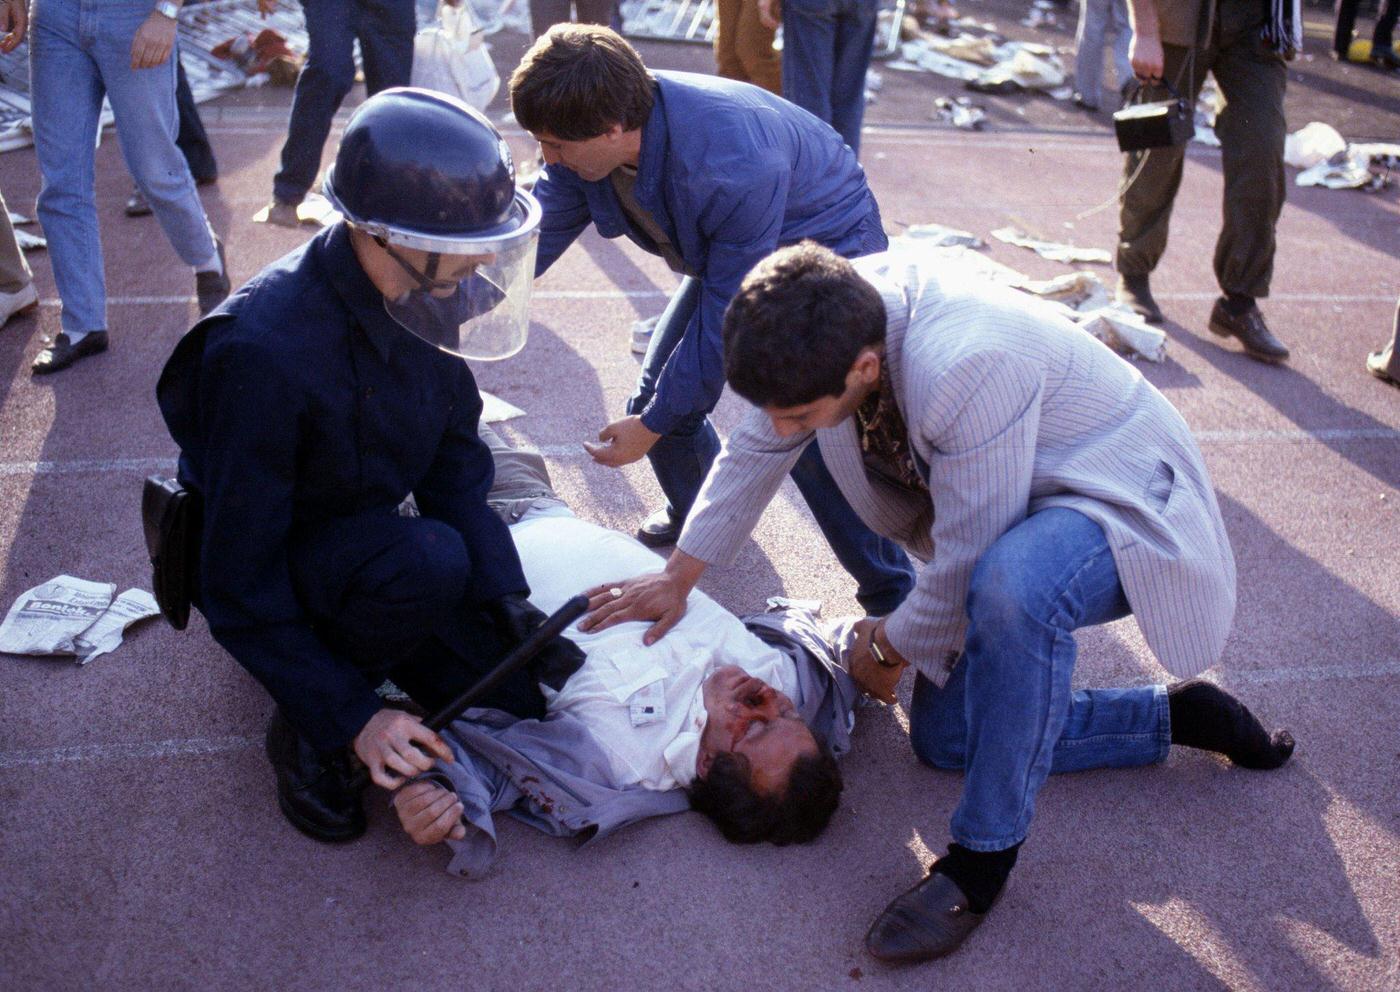 Riot police try to revive an injured fan at Heysel Stadium, European Cup Final, 1985.